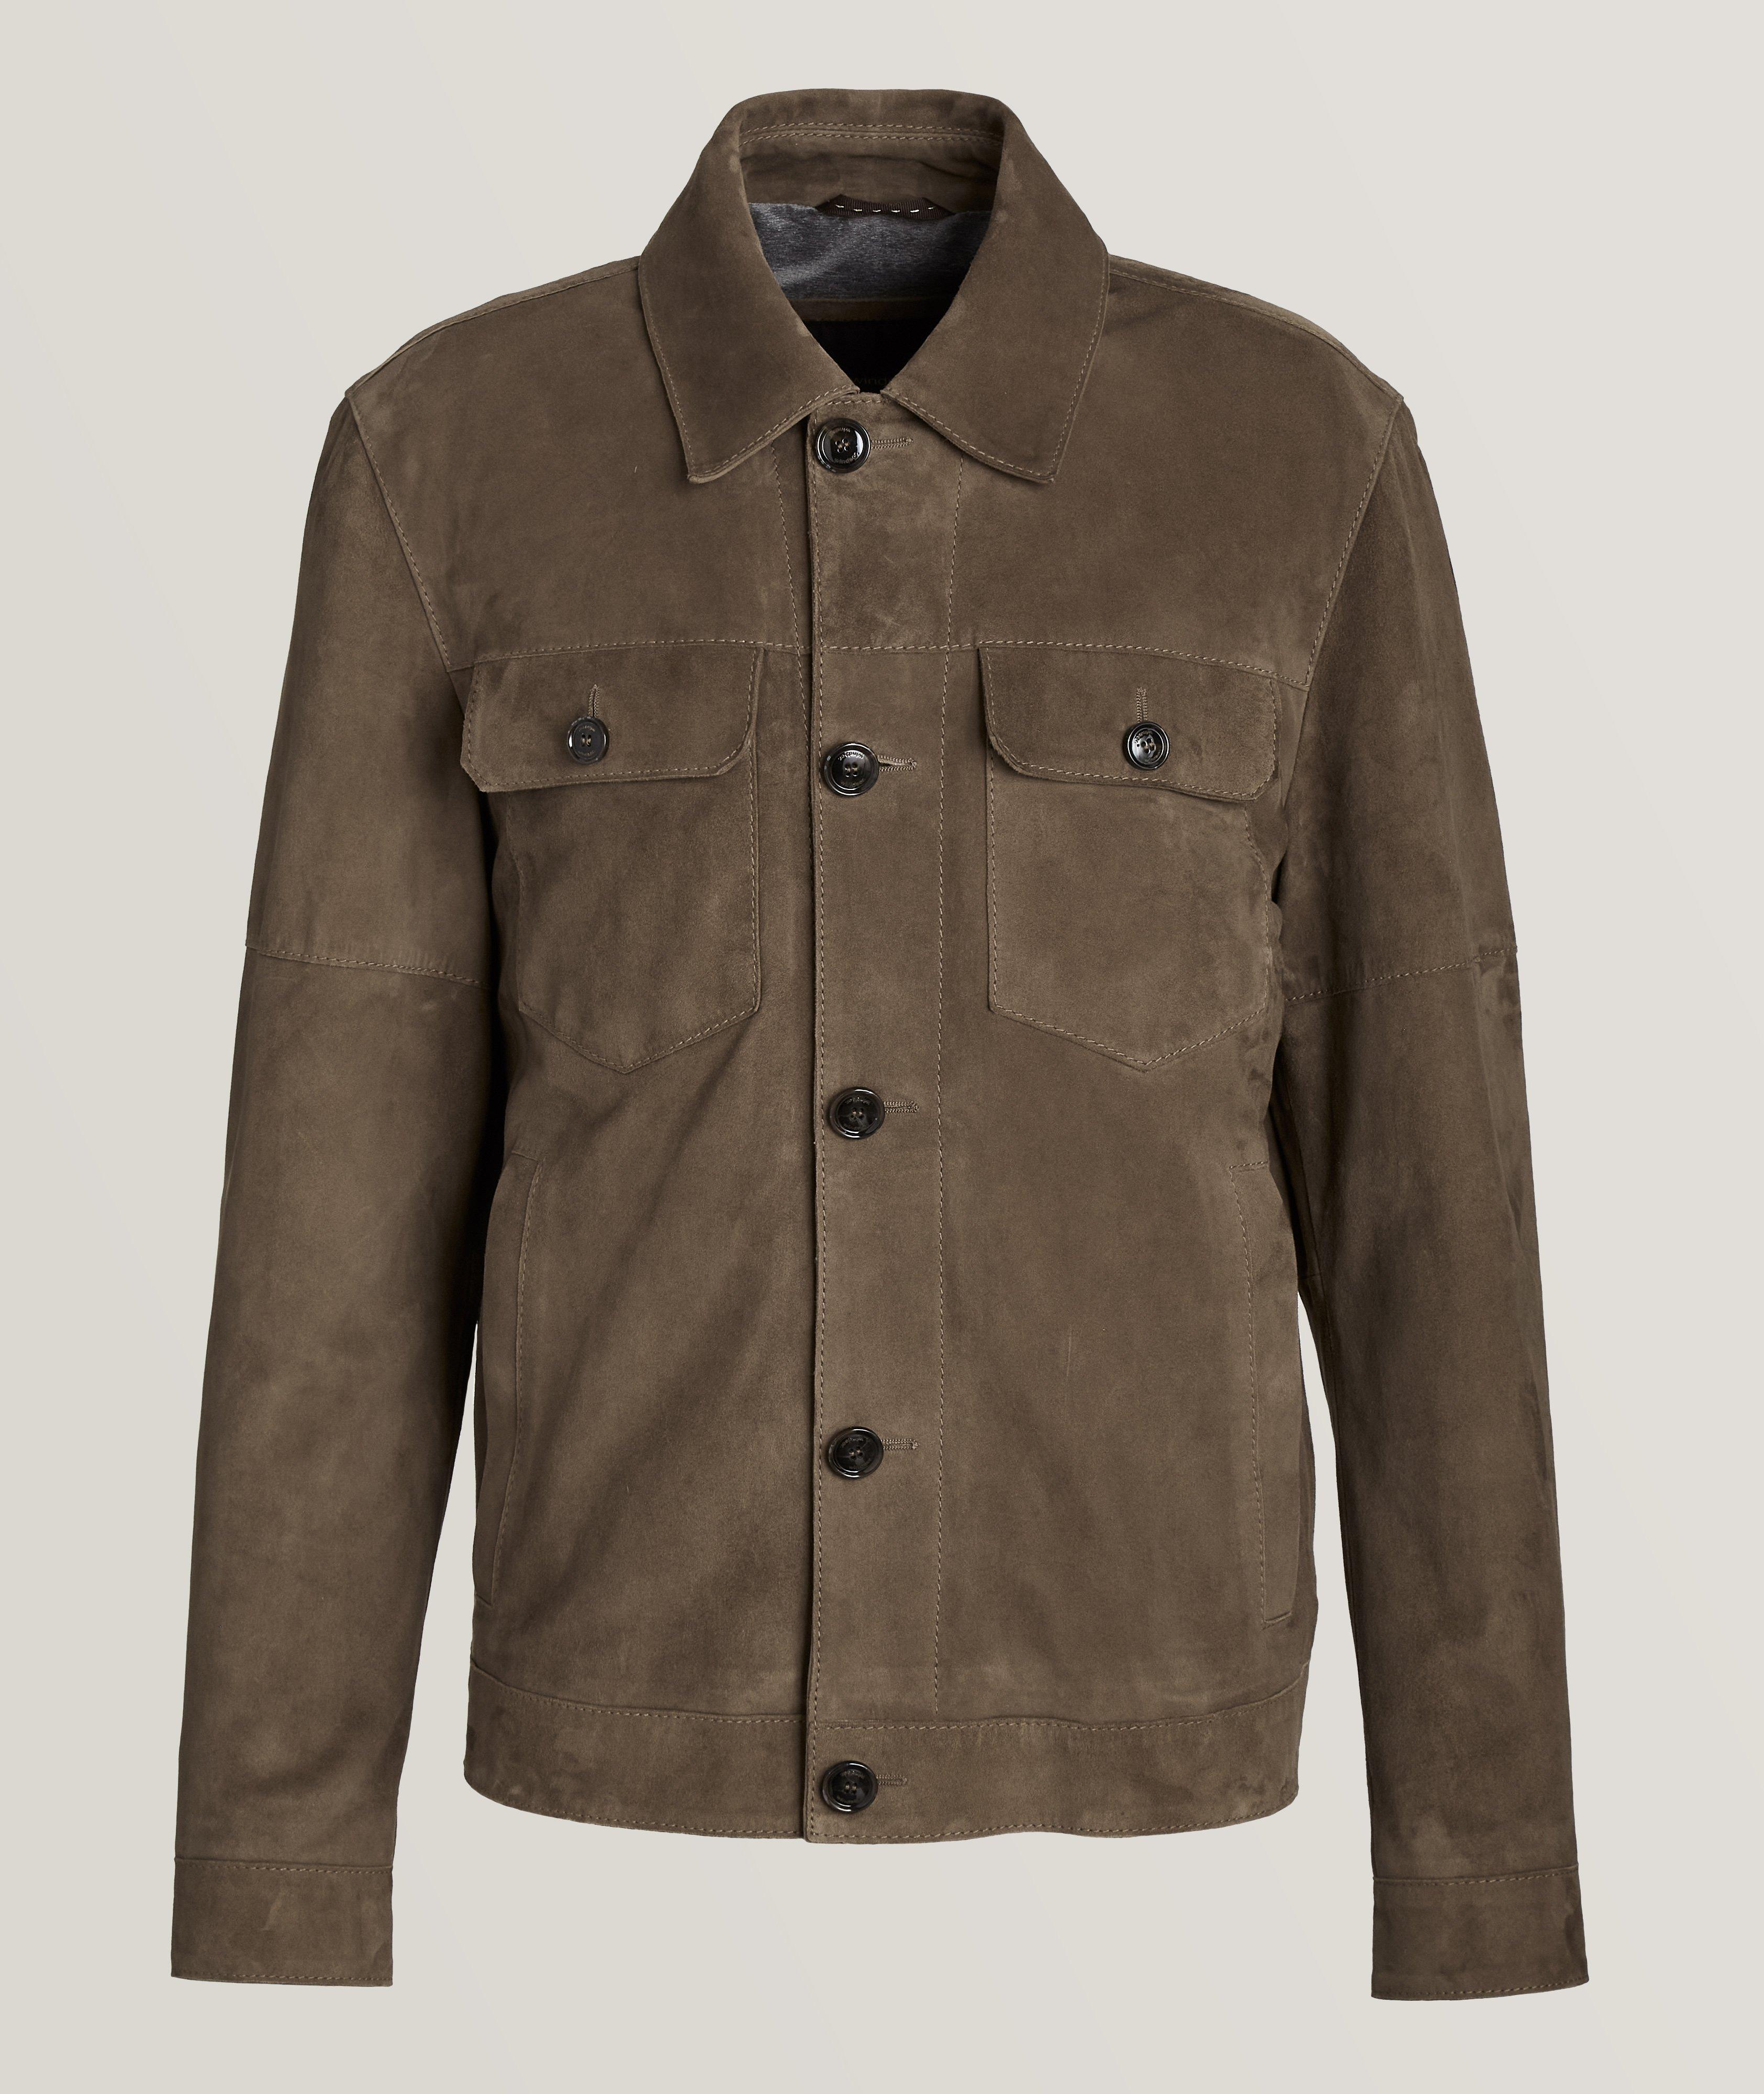 Ultrarian Suede Jacket image 0